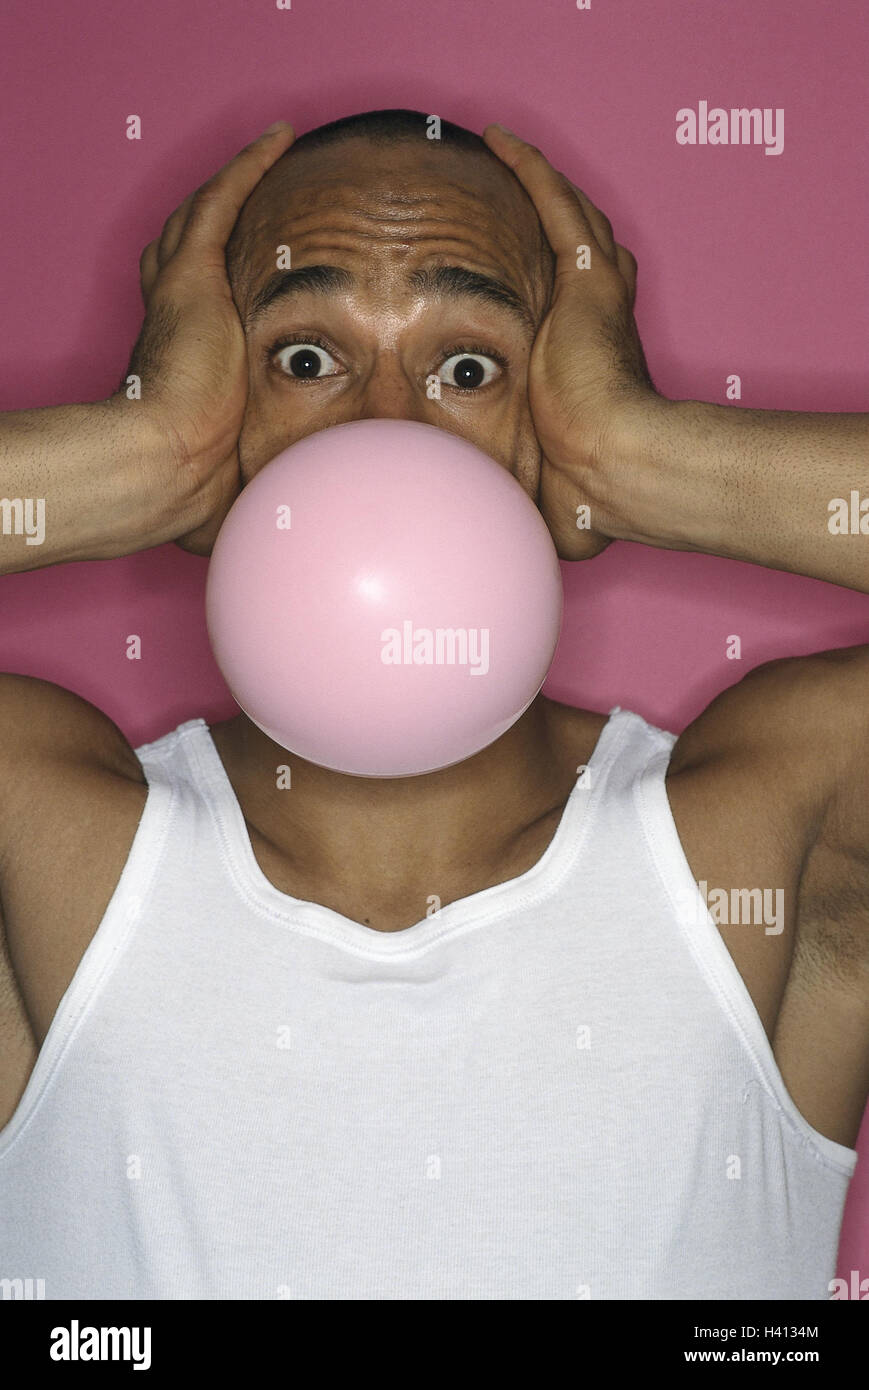 Man, dark-skinned, chewing gum bubble, facial play, portrait, model released, lifestyle, amusements, fun, humor, chewing gum, chewing gum chew, bubble, expression, funnily, cheerfully, cheerfulness, very close Stock Photo